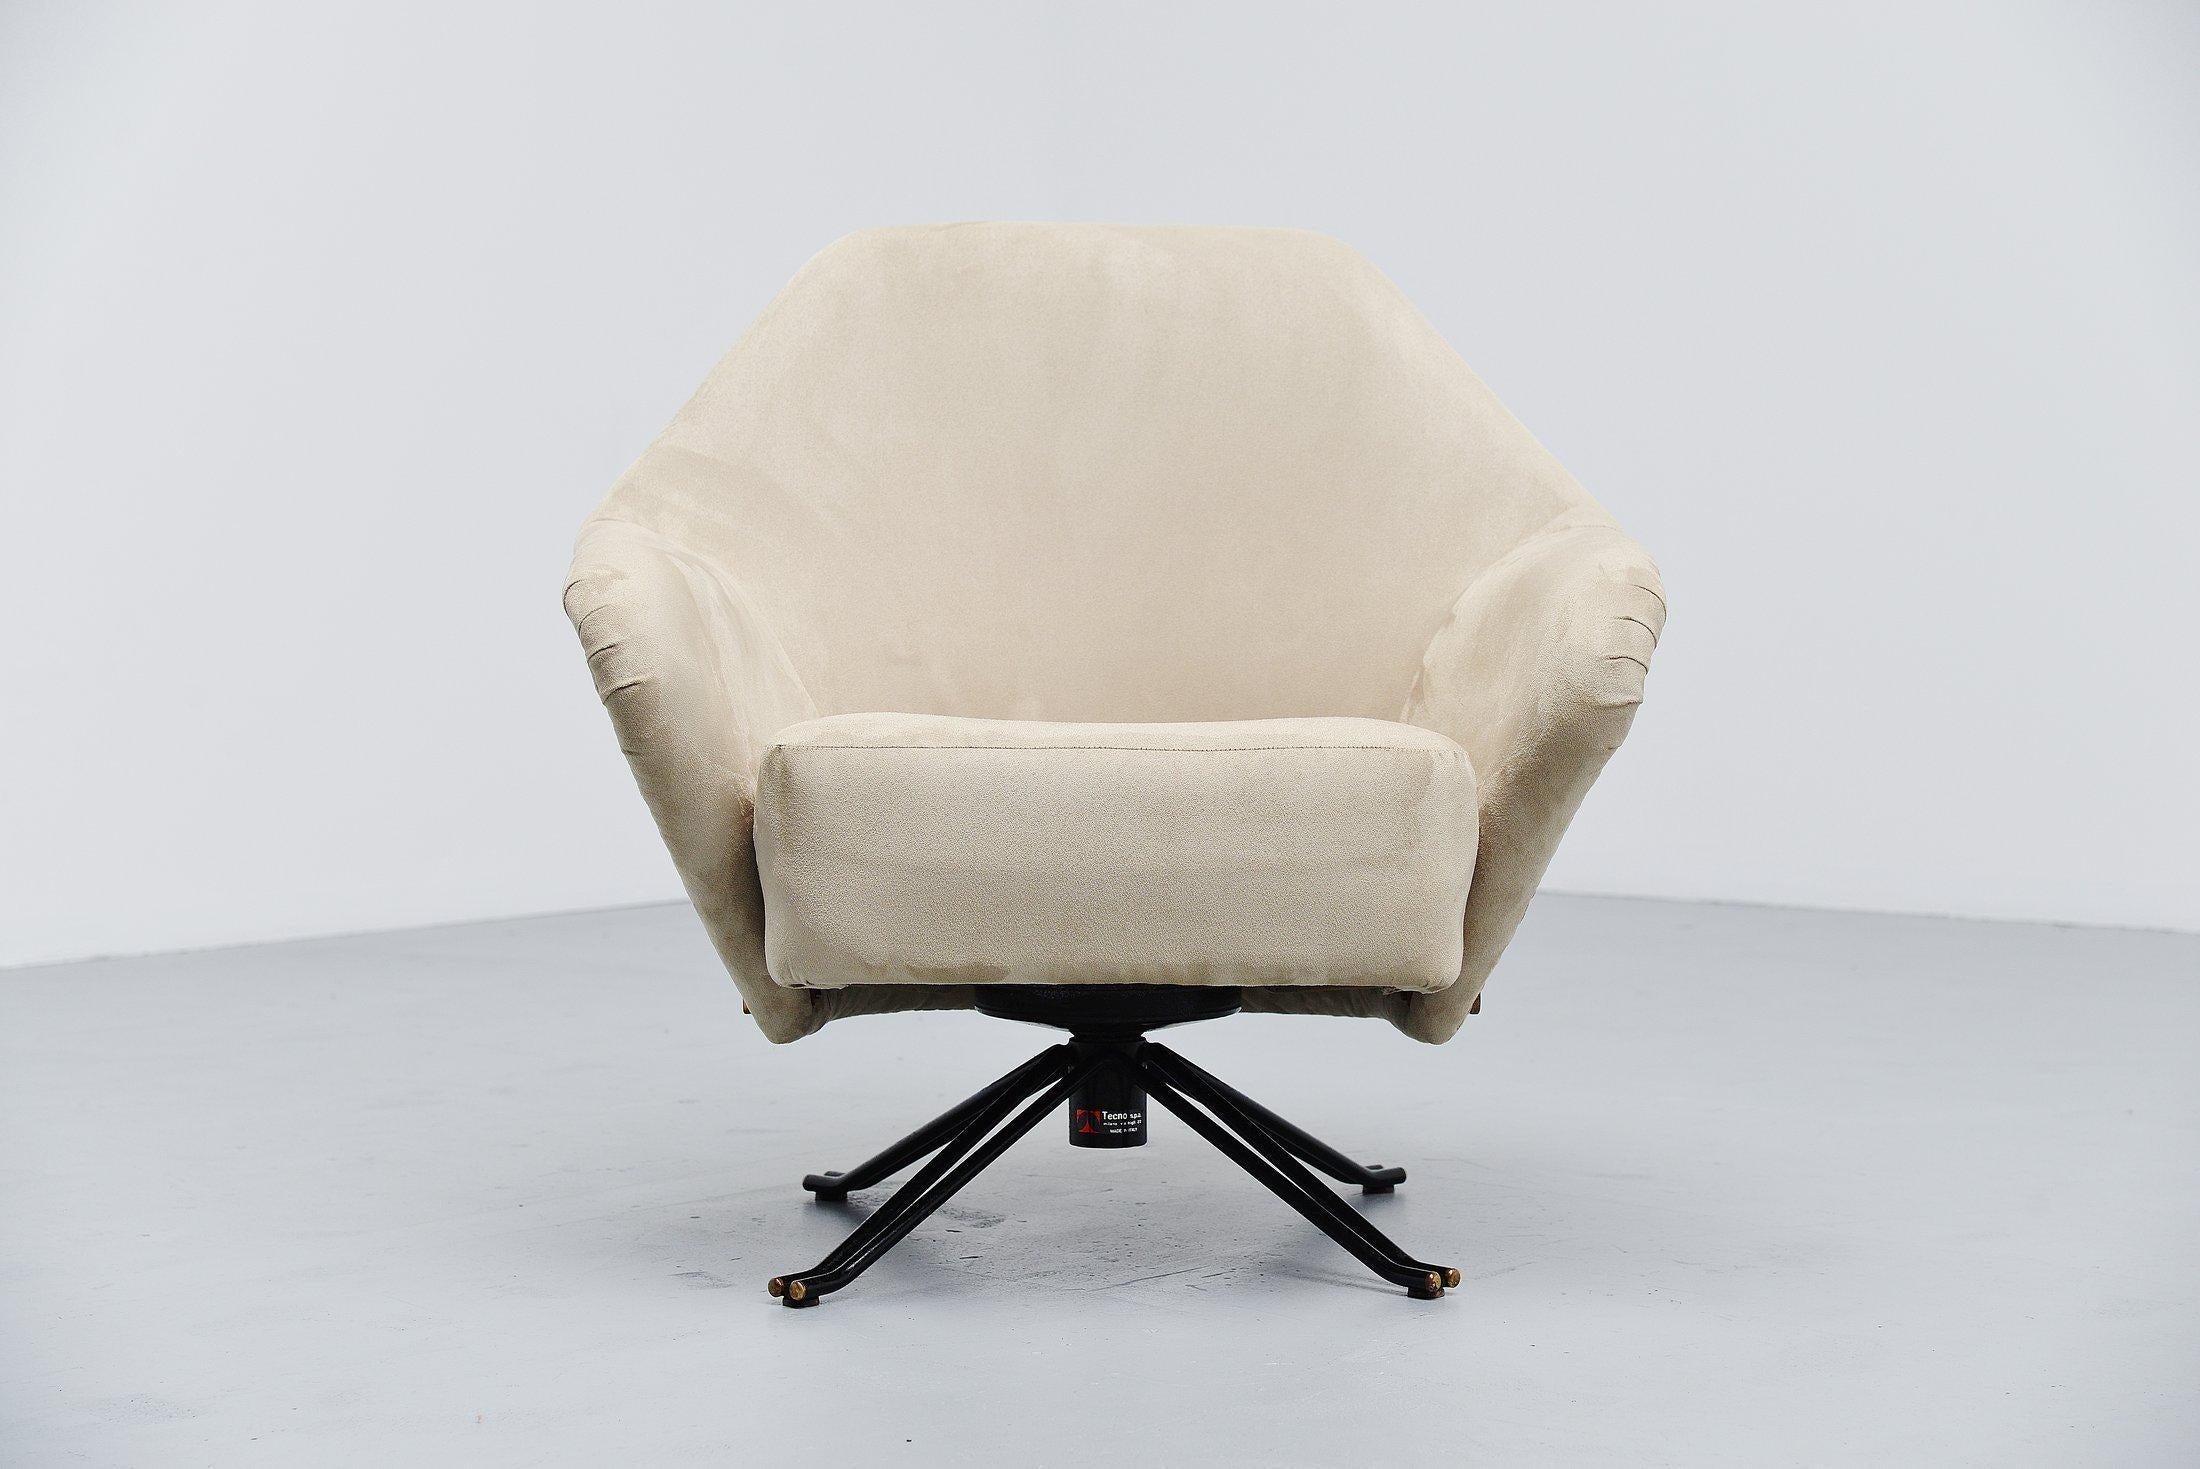 Nice early edition of the P32 chair designed by Osvaldo Borsani for Tecno, Italy 1956. This chair was produced from 1956 to 1962 and the chair is from the first production. This chair swivels and tilt back and works perfectly. The chair is newly